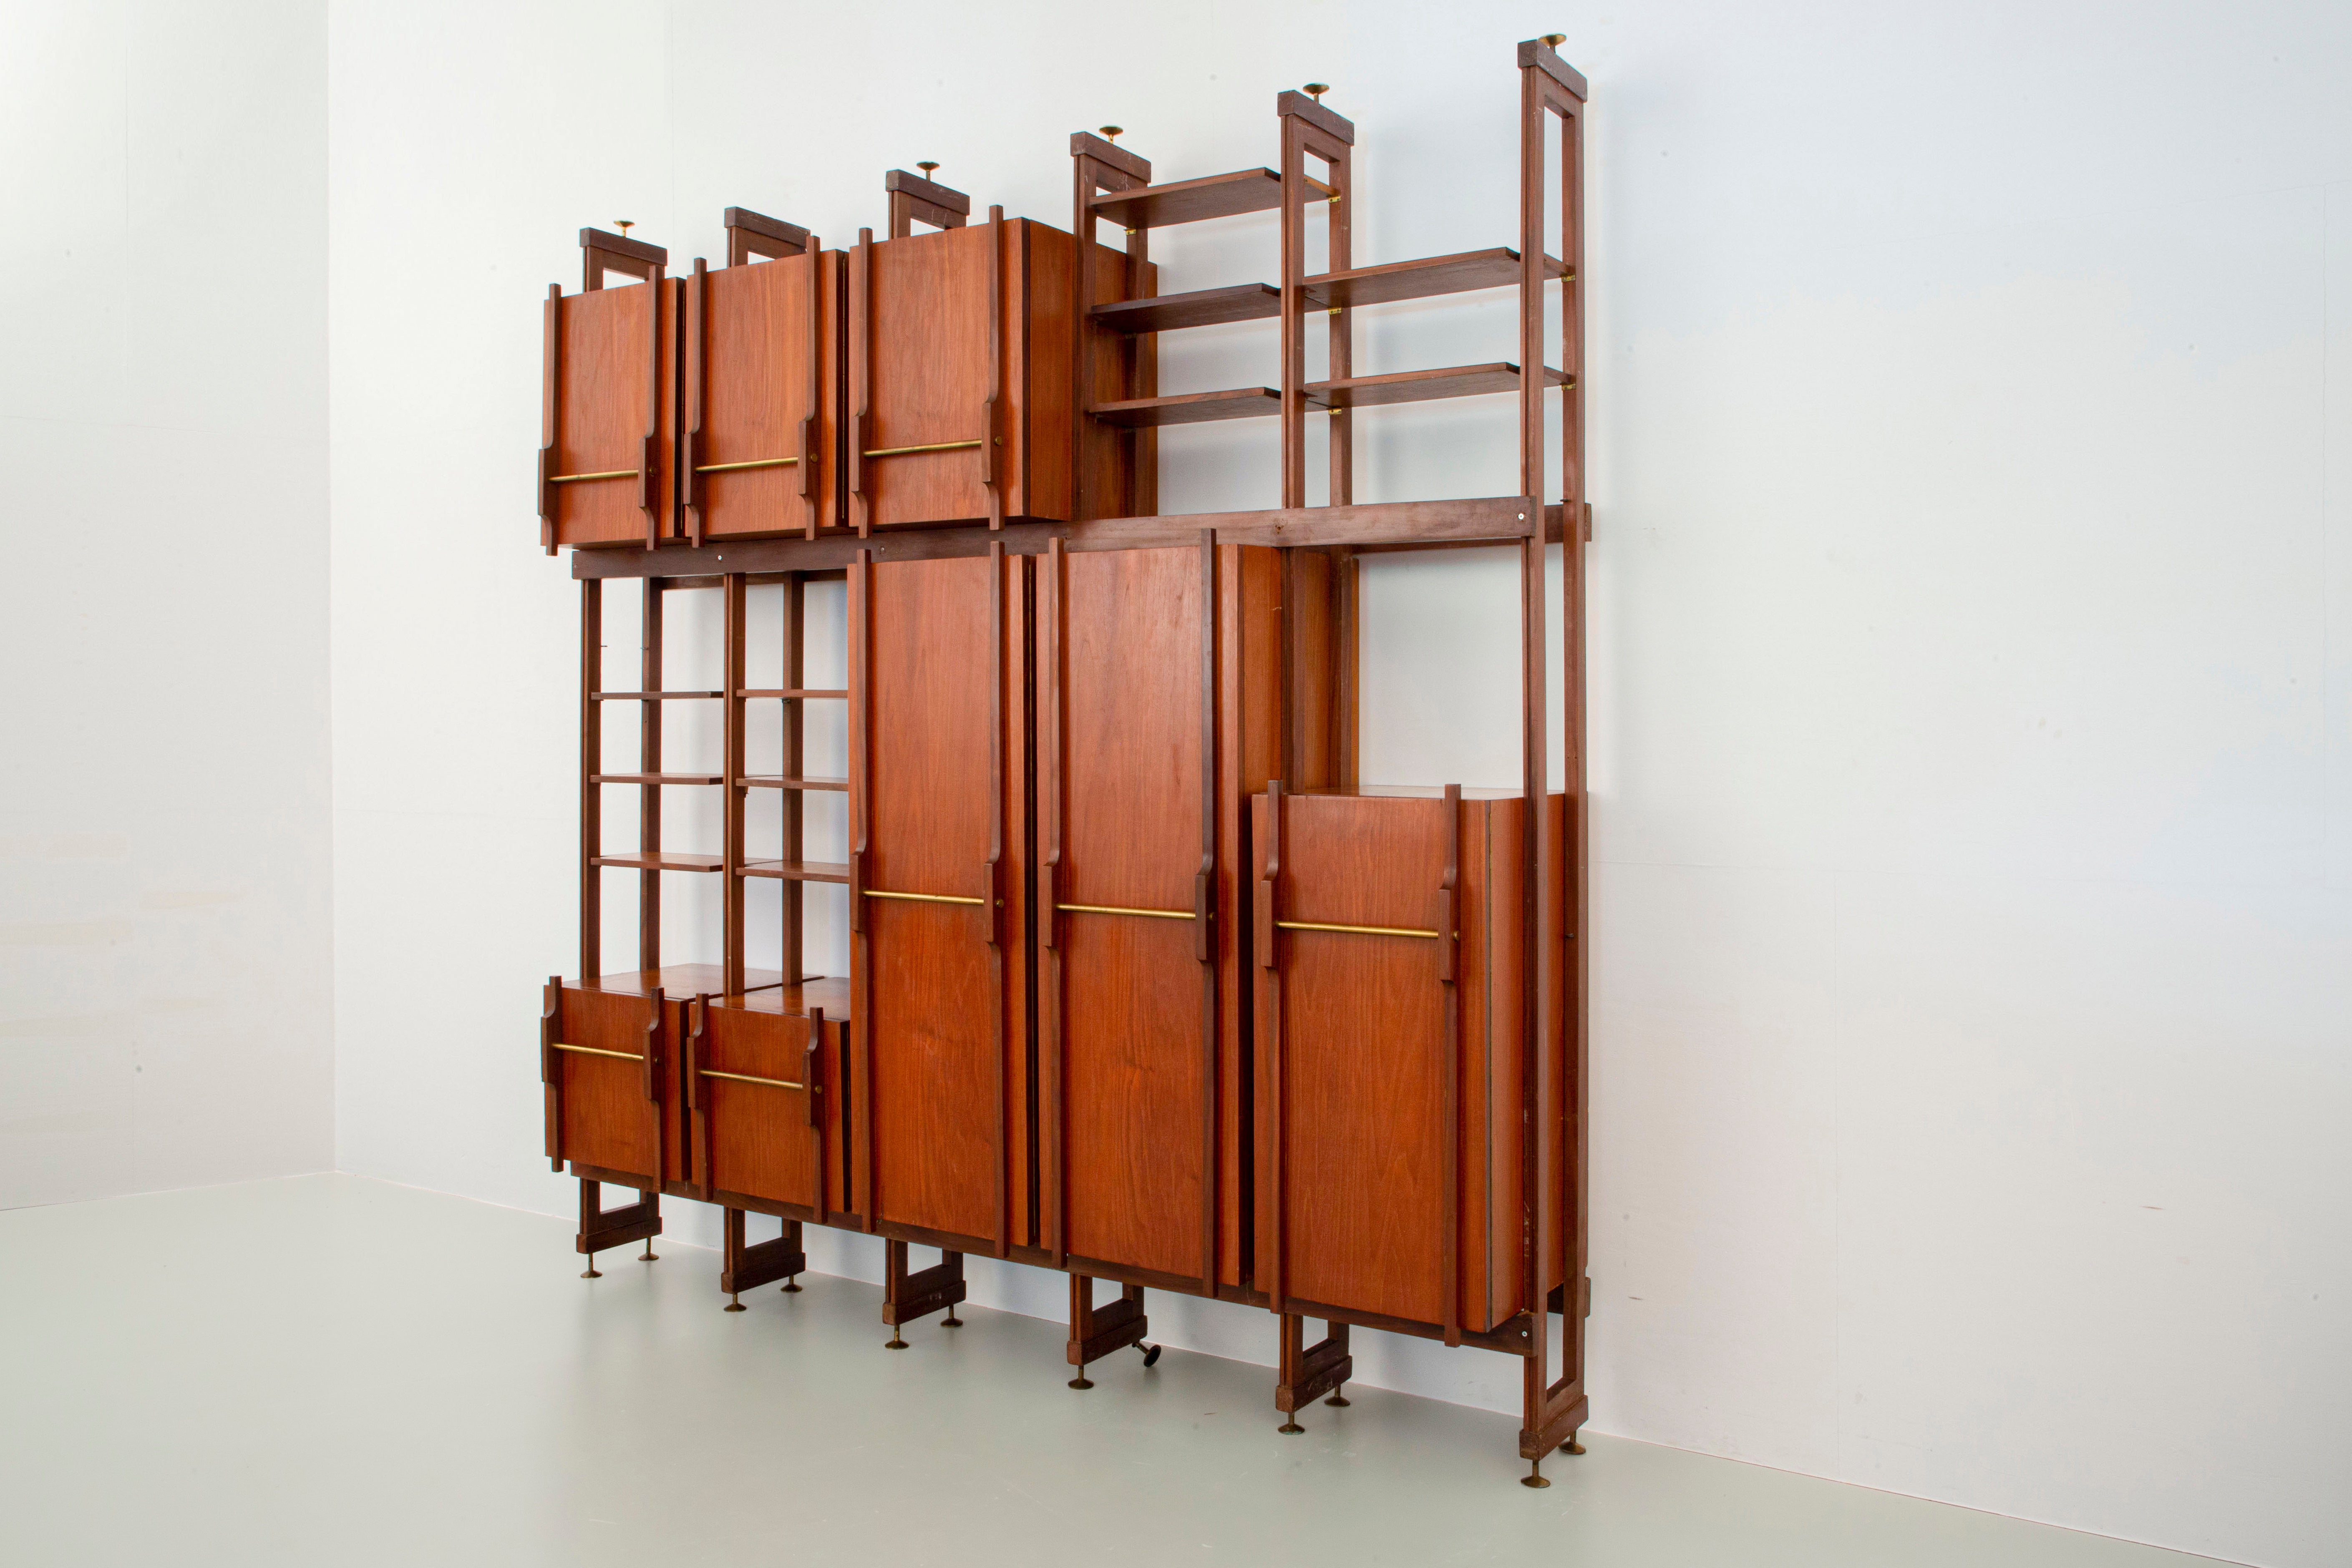 Library / Wardrobe in teak, walnut and brass, Italy, 1960's

We are very proud to add this large library / wardrobe to our collection. With the use of different kinds of wood a warm and playful atmosphere is created. The wardrobe consists of 5